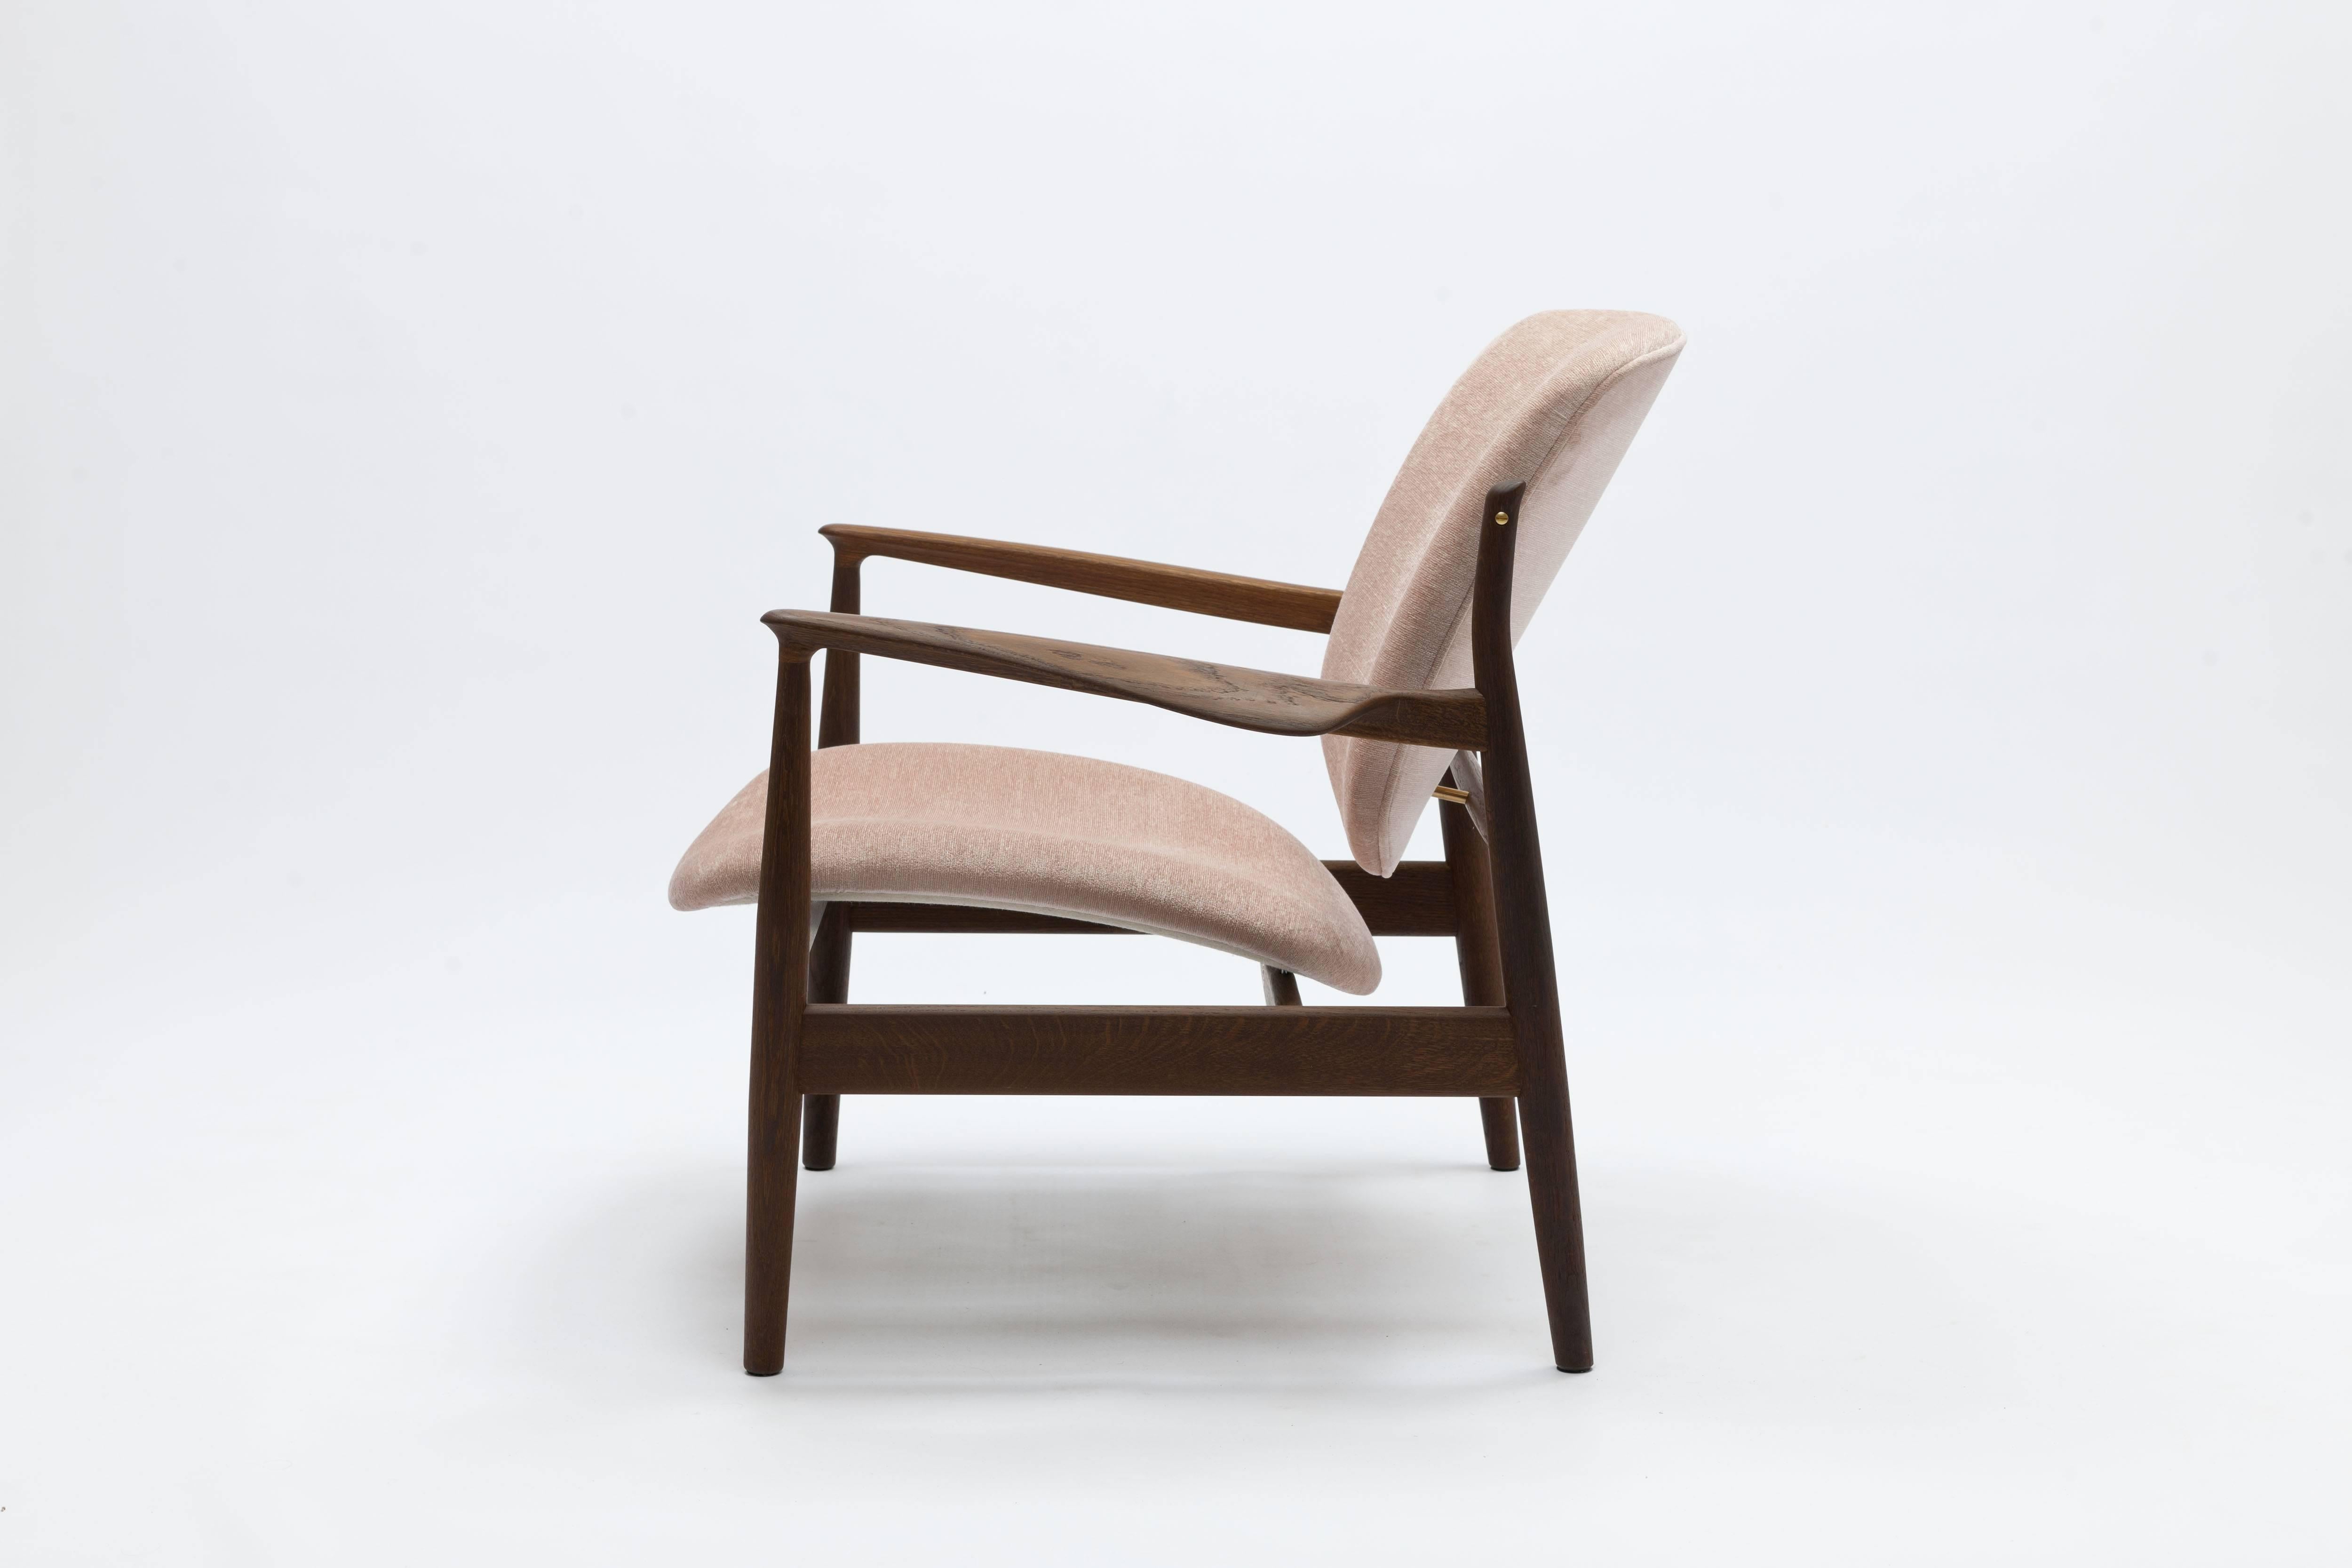 France chair by Finn Juhl, made by House of Finn Juhl Denmark. Frame of solid smoked oak with brass hardware beautifully upholstered in a pale pink bespoke fabric by Sahco Hesslein. 
For color and quality reference we can always send you a fabric